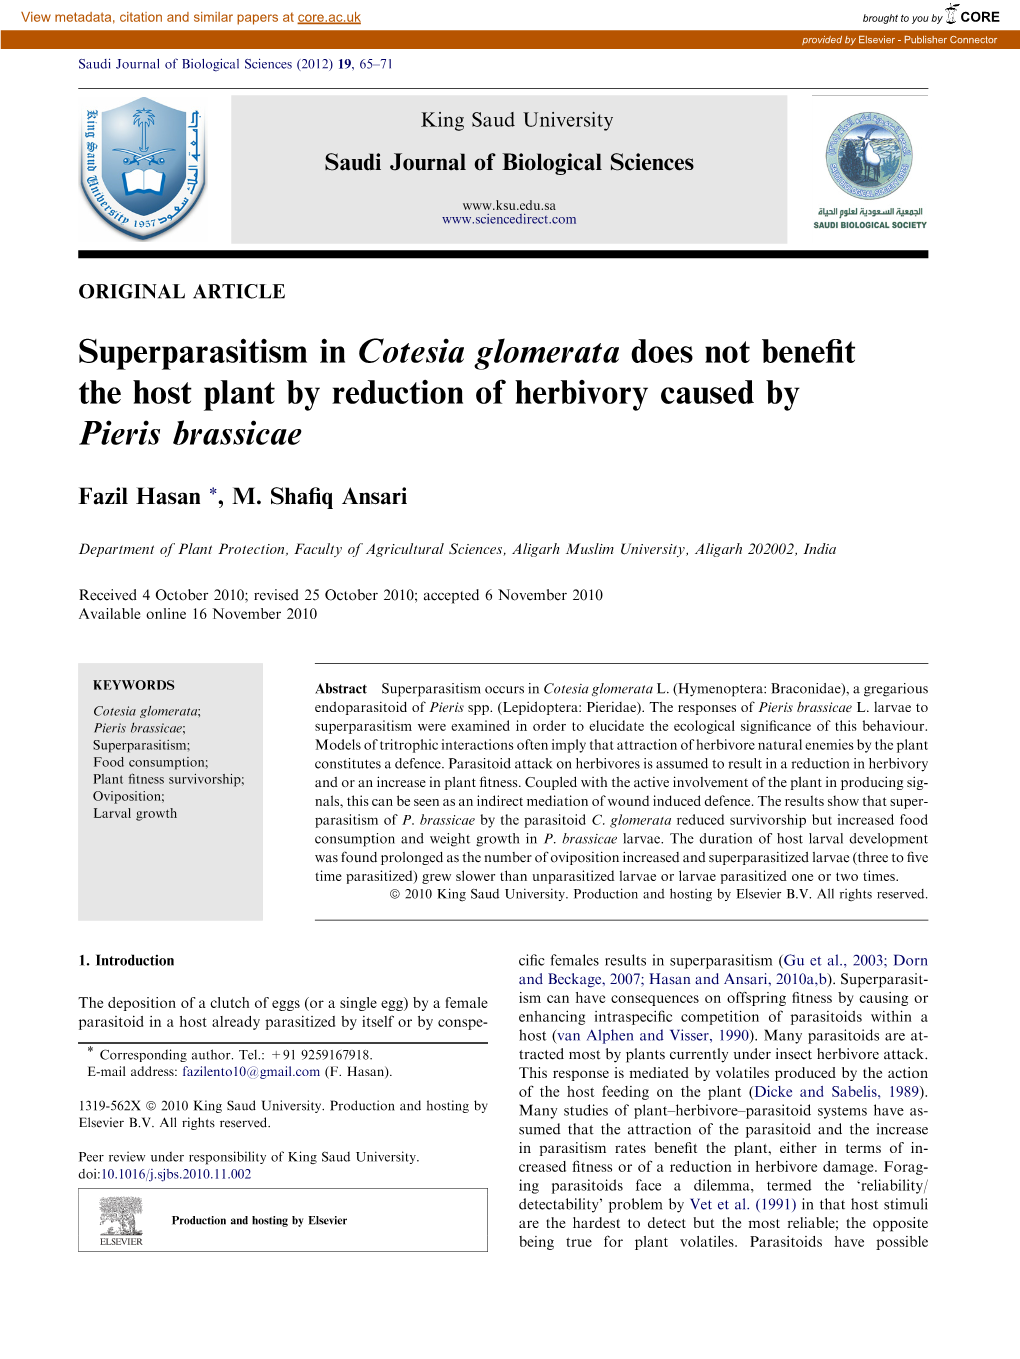 Superparasitism in Cotesia Glomerata Does Not Benefit the Host Plant By